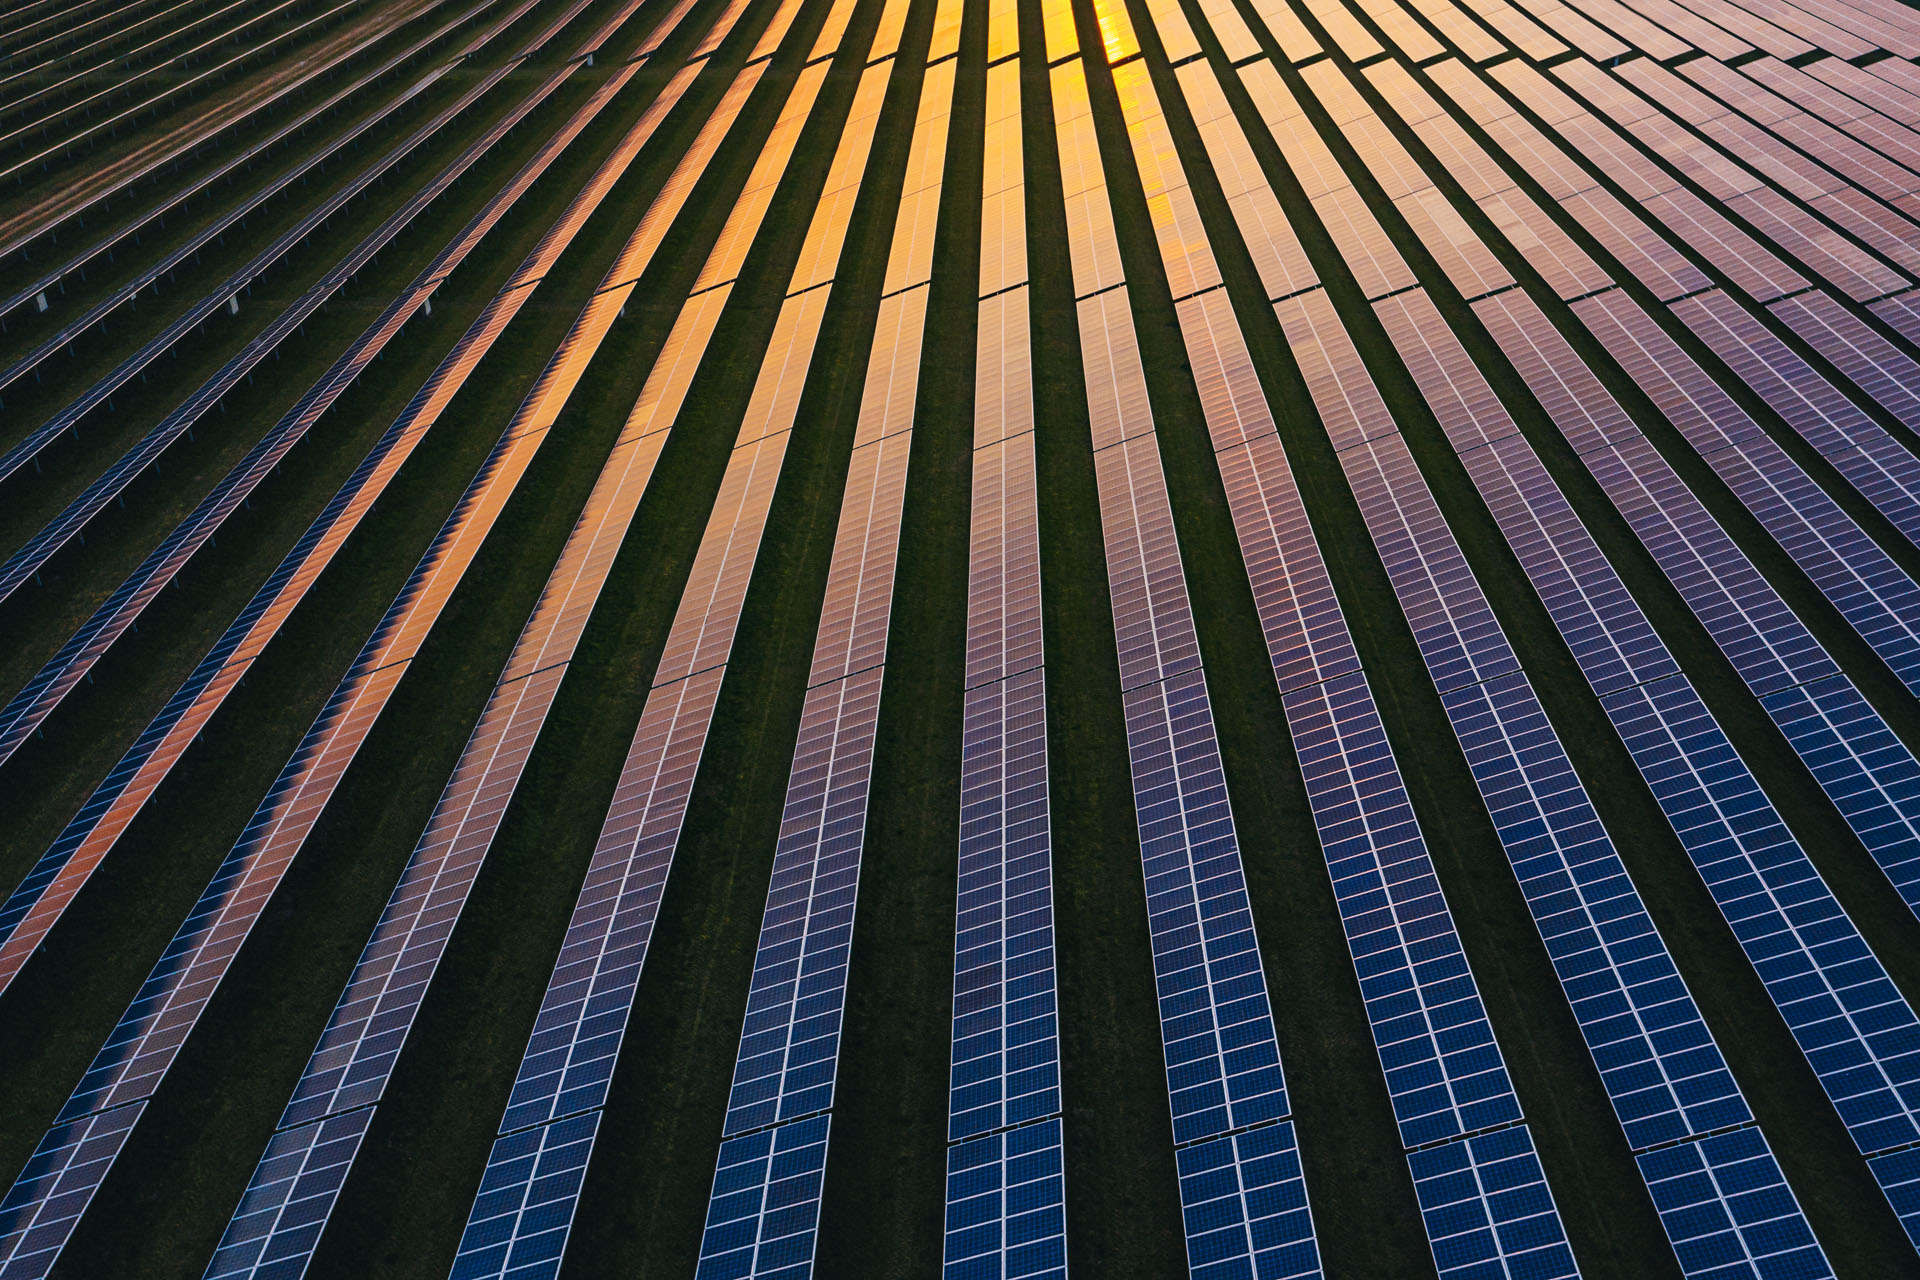 A photograph of a field of solar panels, the setting sun shining on the top of the image.